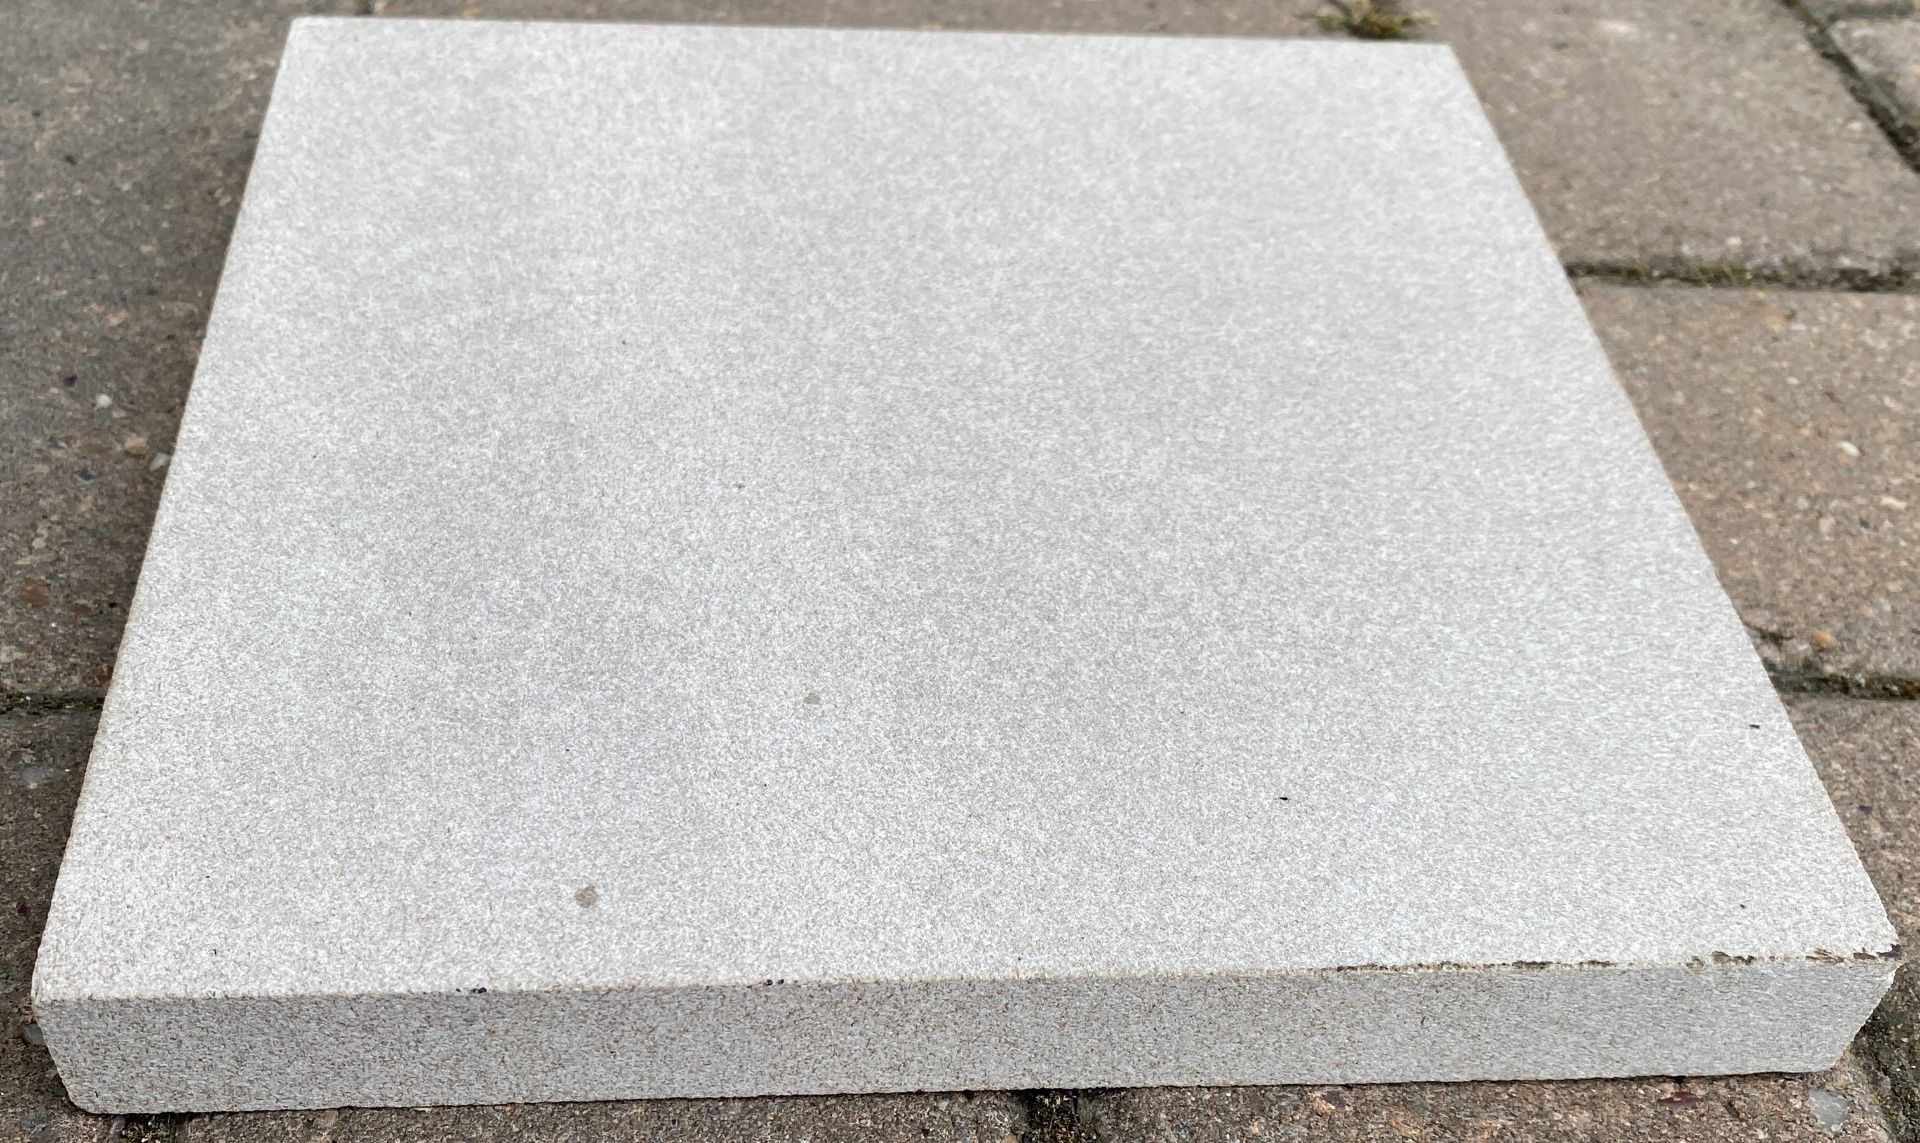 Contents to 3 pallets of BLOCKSTONE MOUSELOW NATURAL SANDSTONE, RUBBED FINISH FACING/PATIO STONE. - Bild 5 aus 8